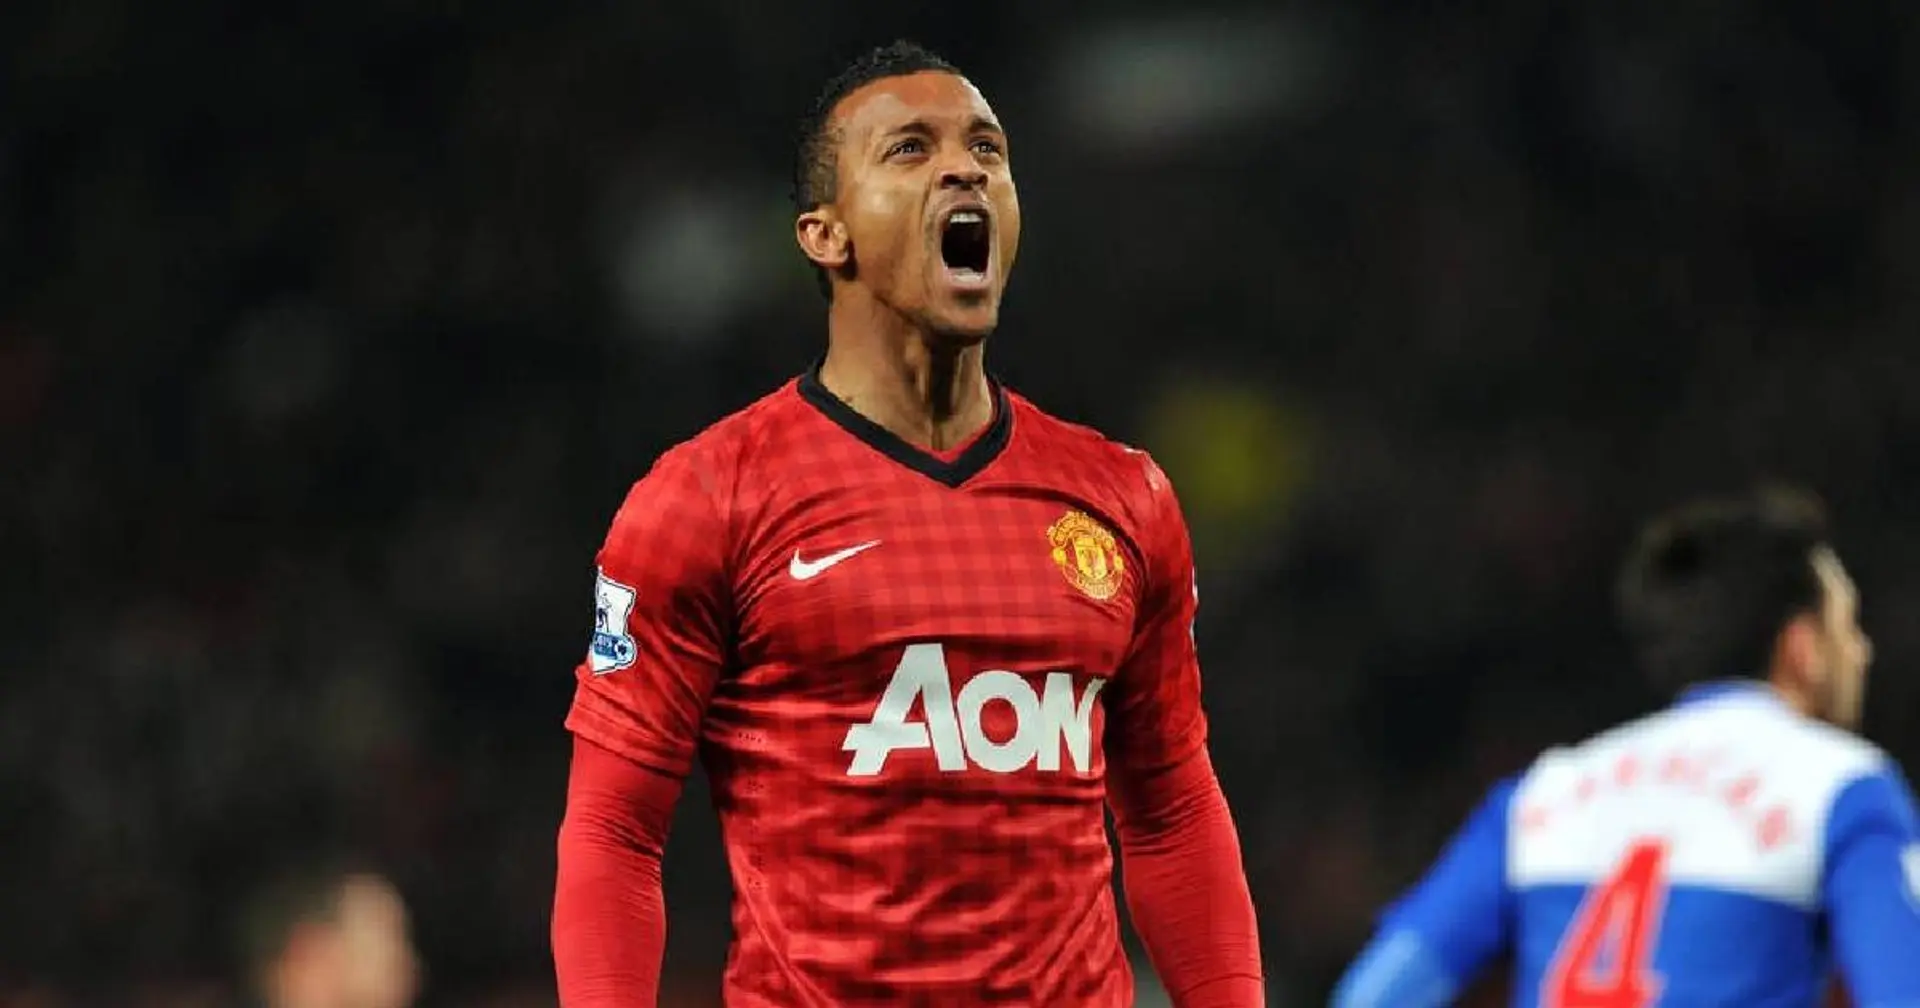 Nani reveals why he signed for Man United rejecting all other offers, including Arsenal's